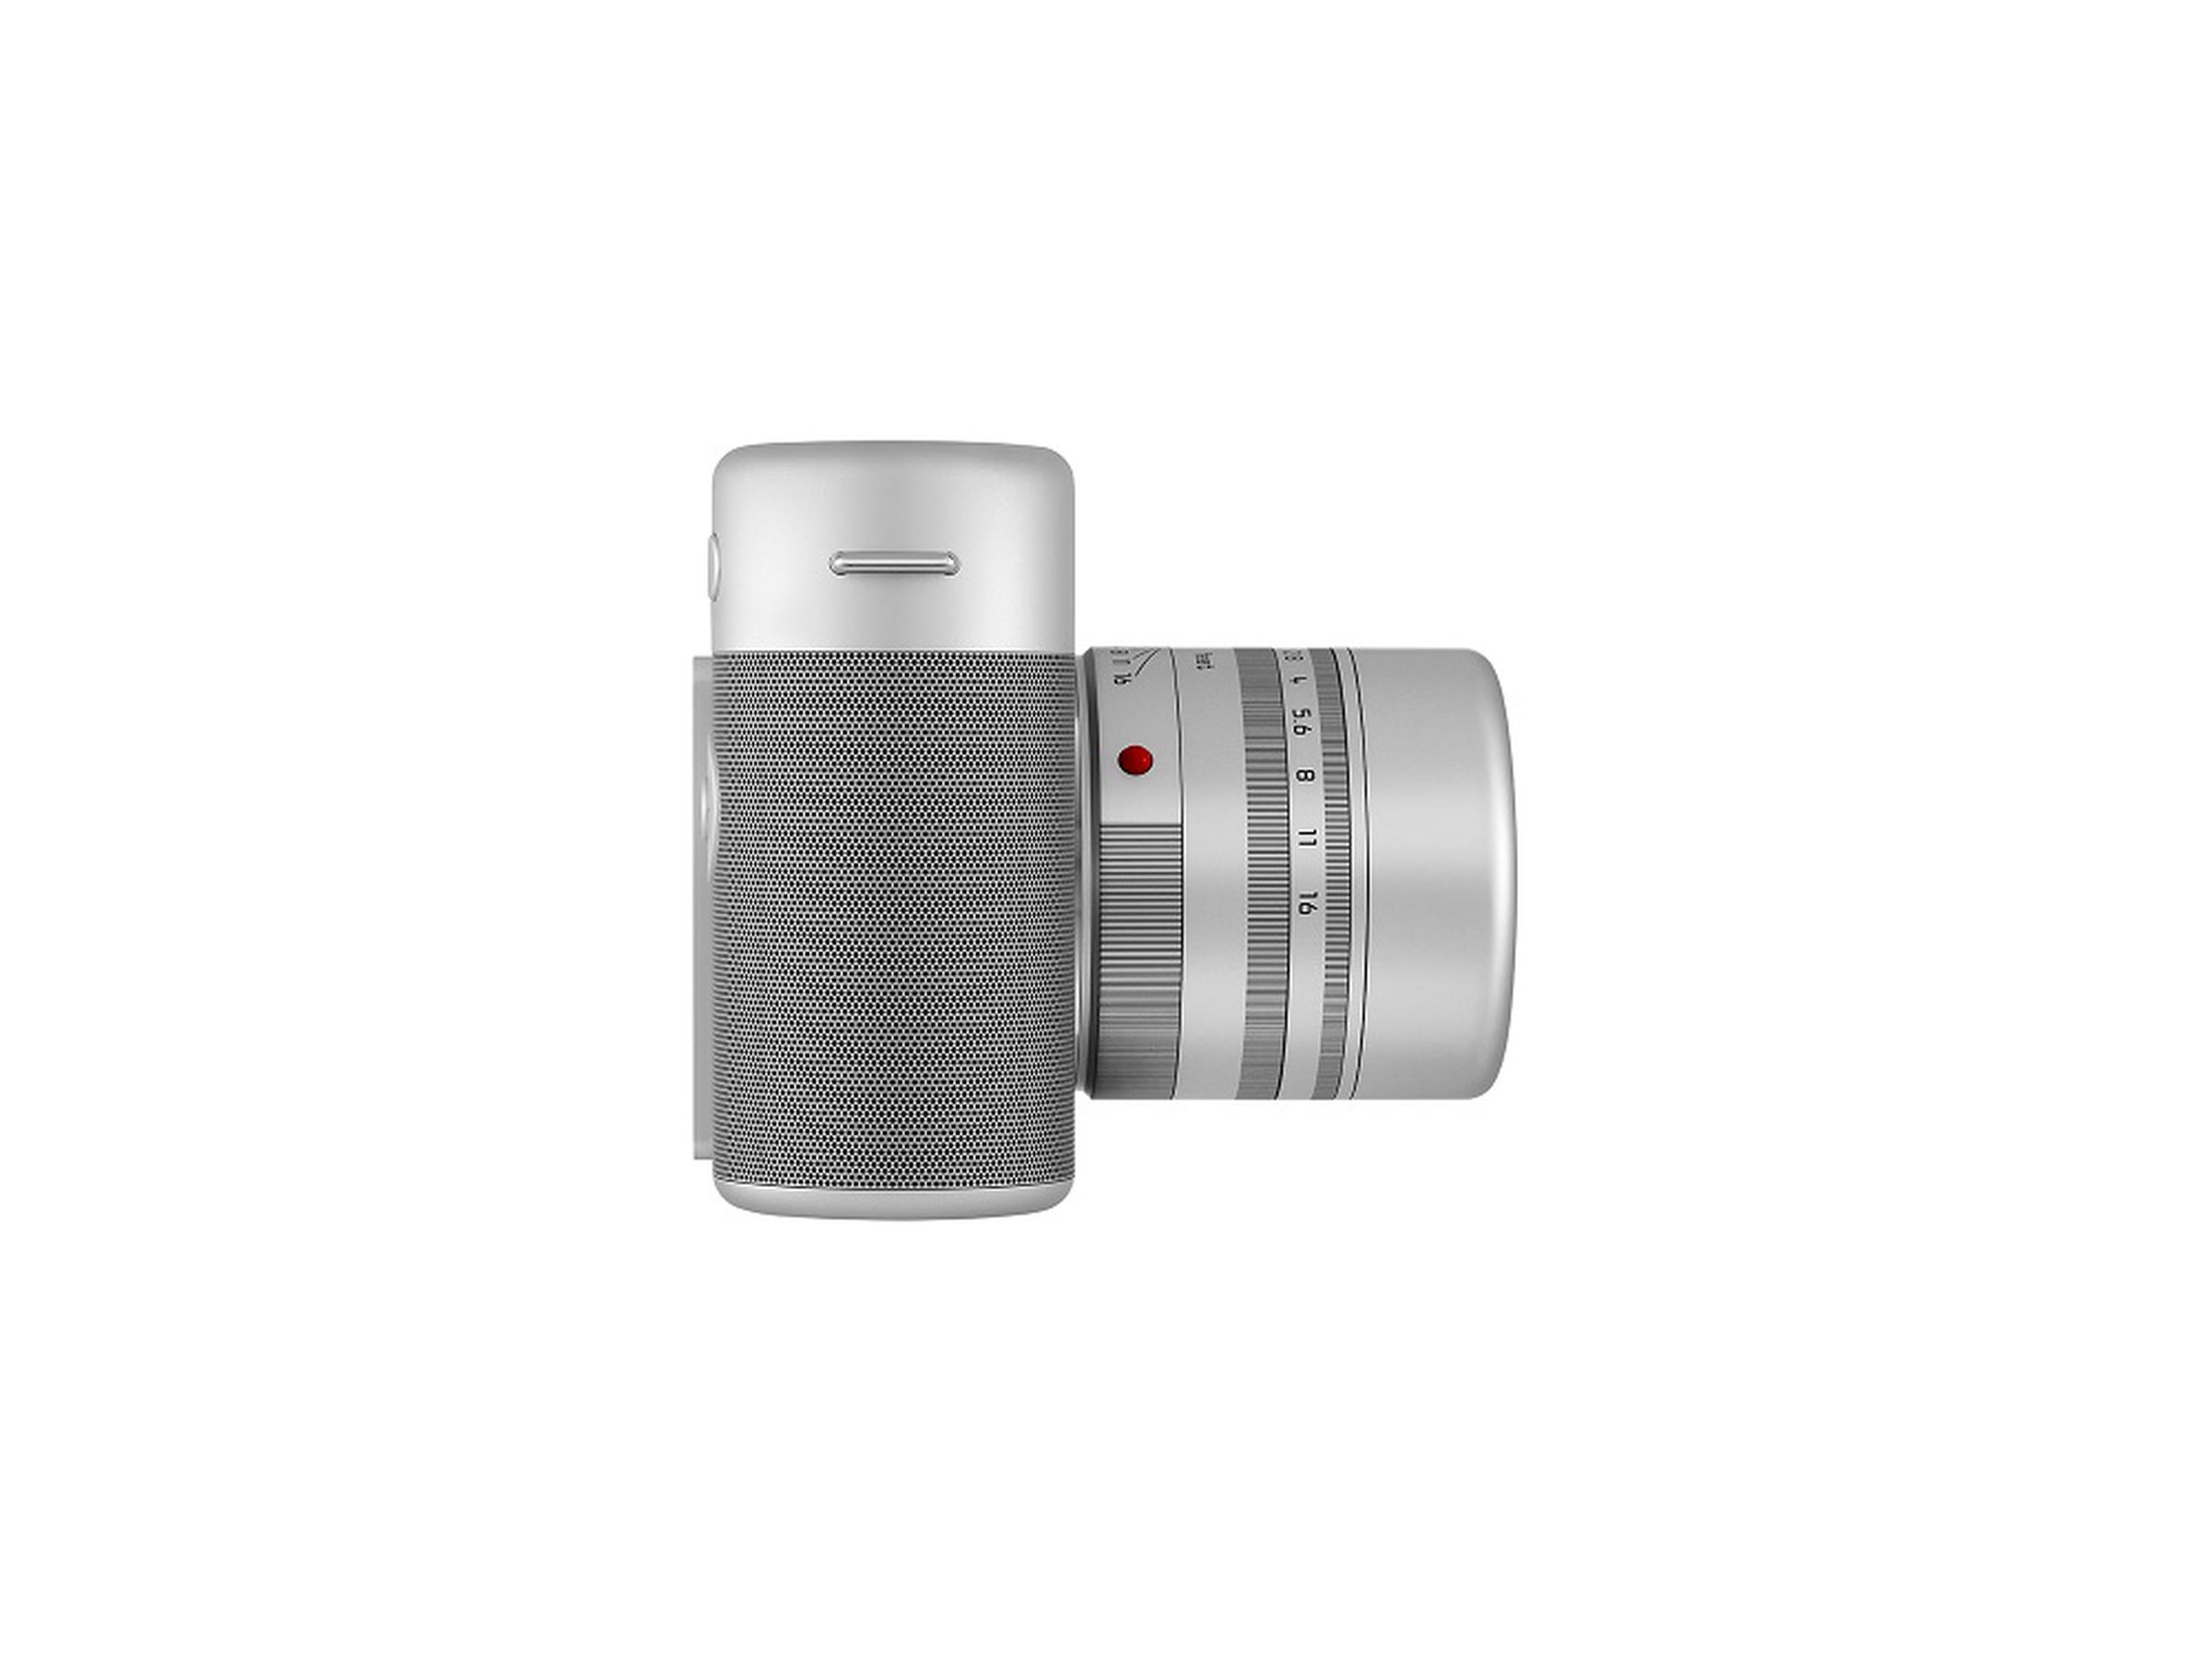 Leica M camera designed by Jony Ive and Marc Newson